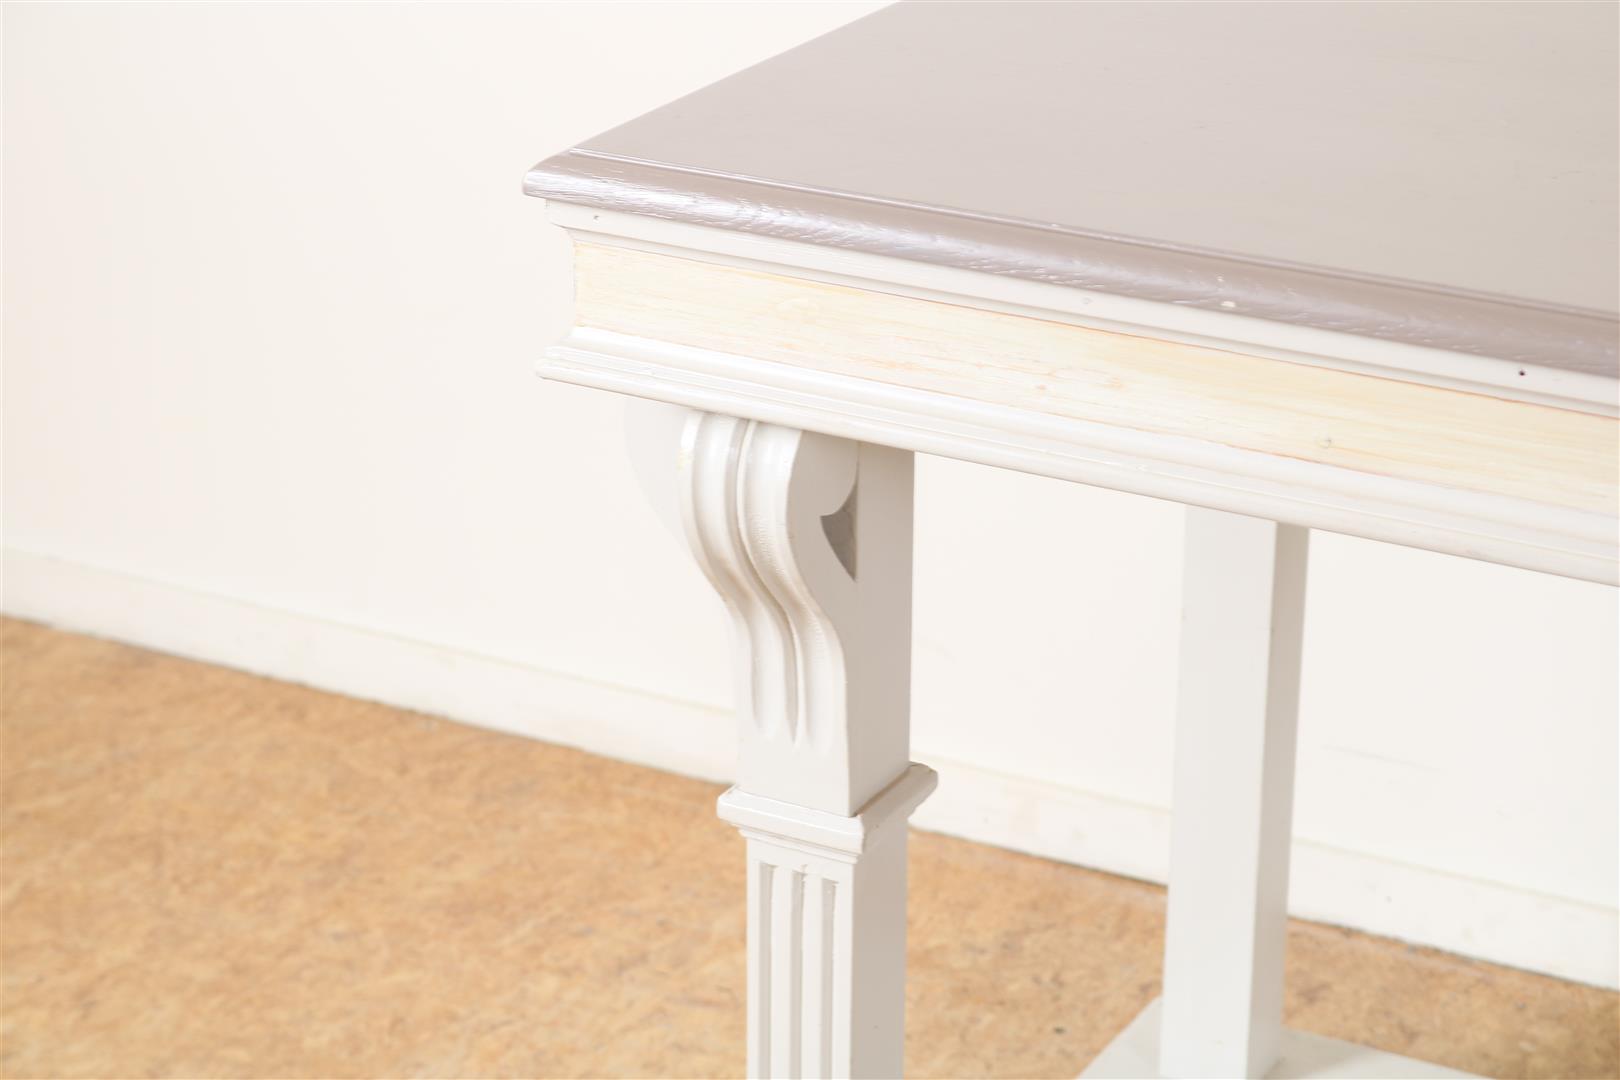 Oak white-painted side table with gray painted top on 6 block legs connected by platform, 82 x 200 x - Image 3 of 5